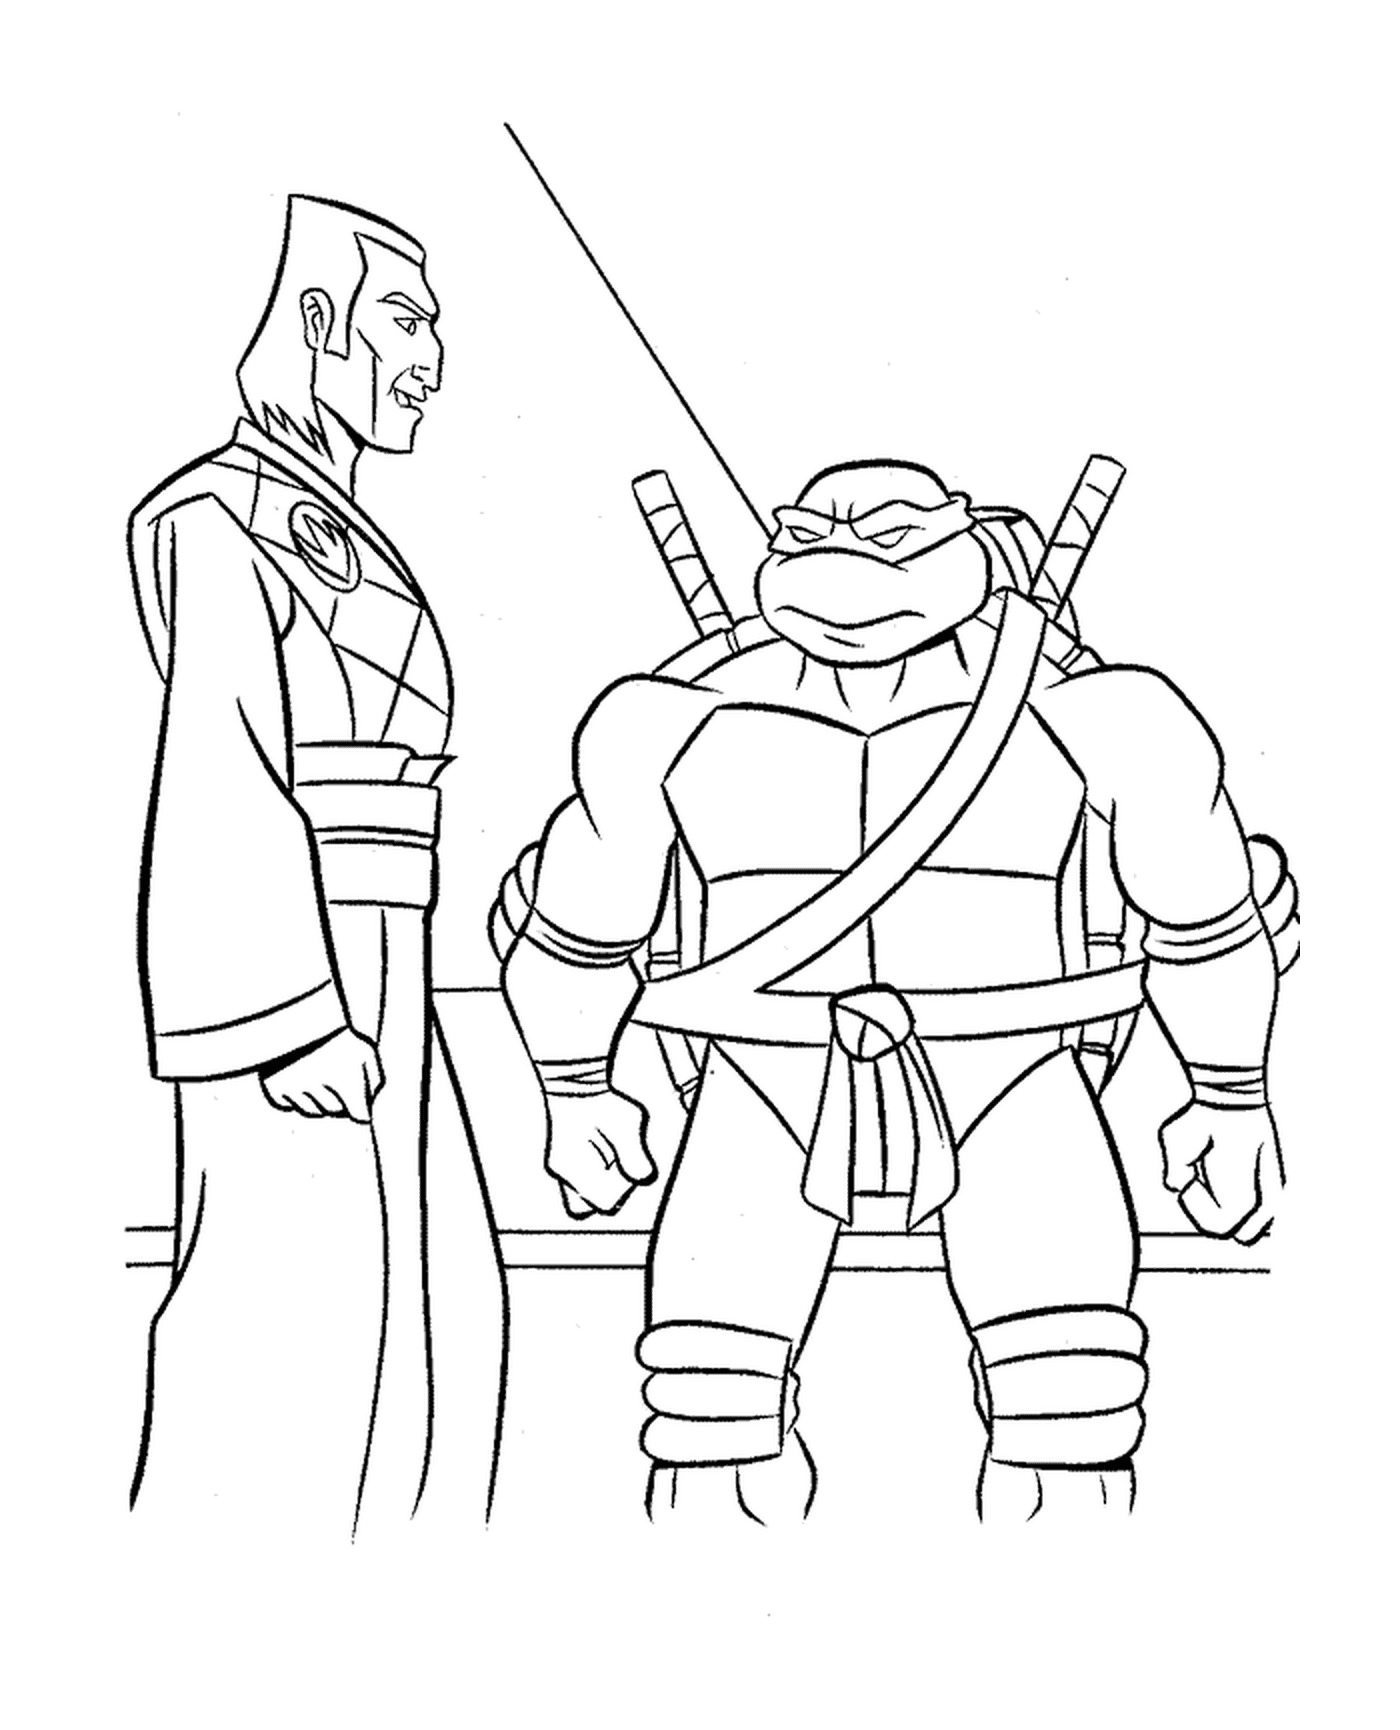  The fearsome character of the ninja turtles 